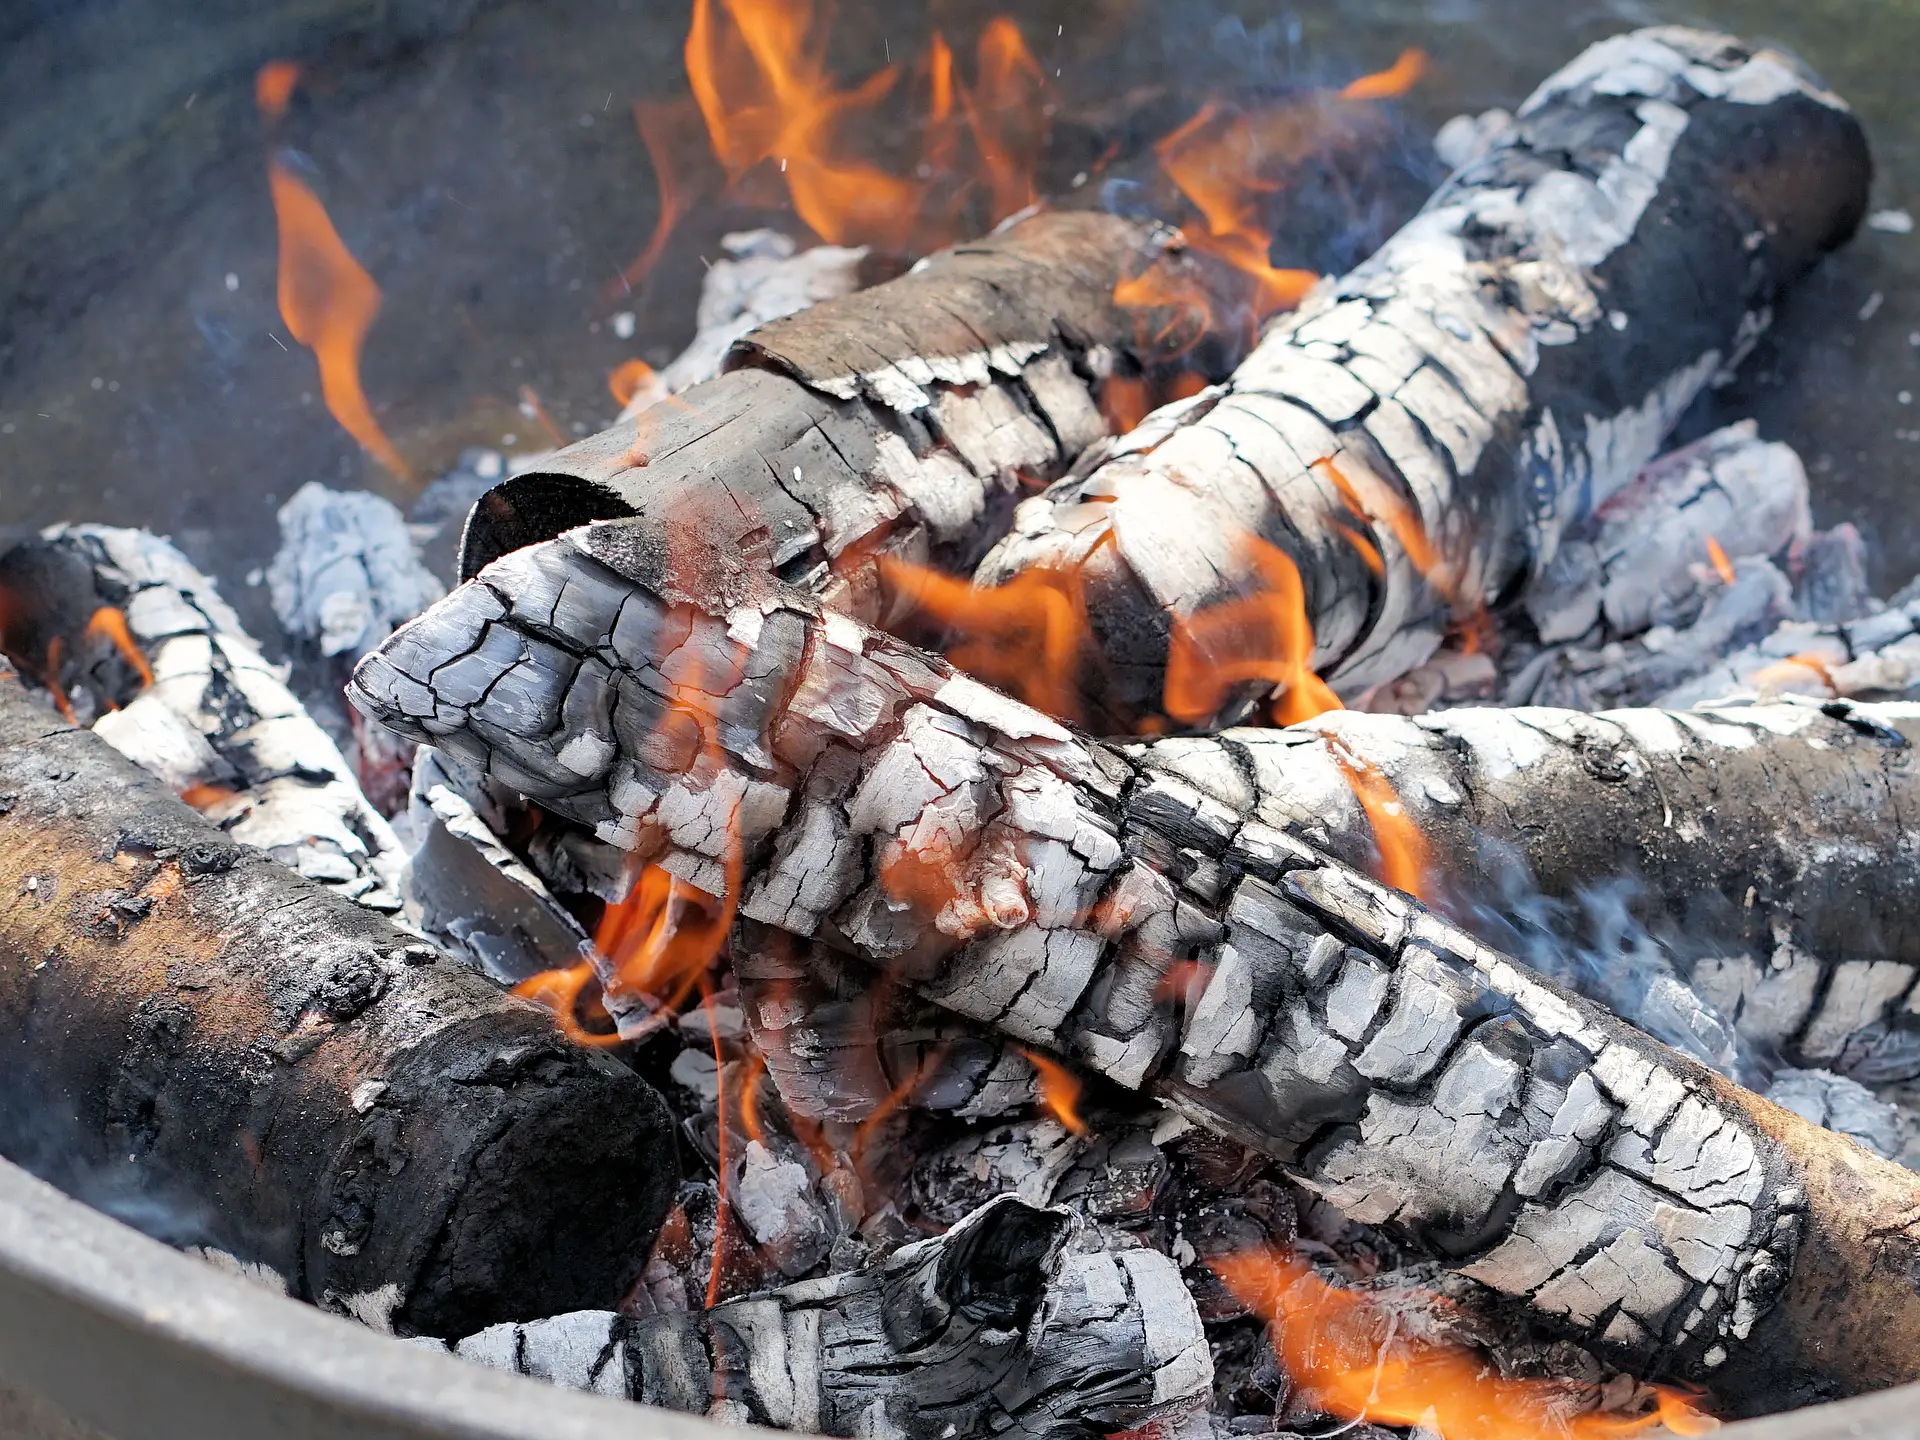 How To Start A Wood Burning Fire Pit, How To Start A Fire In A Fire Pit